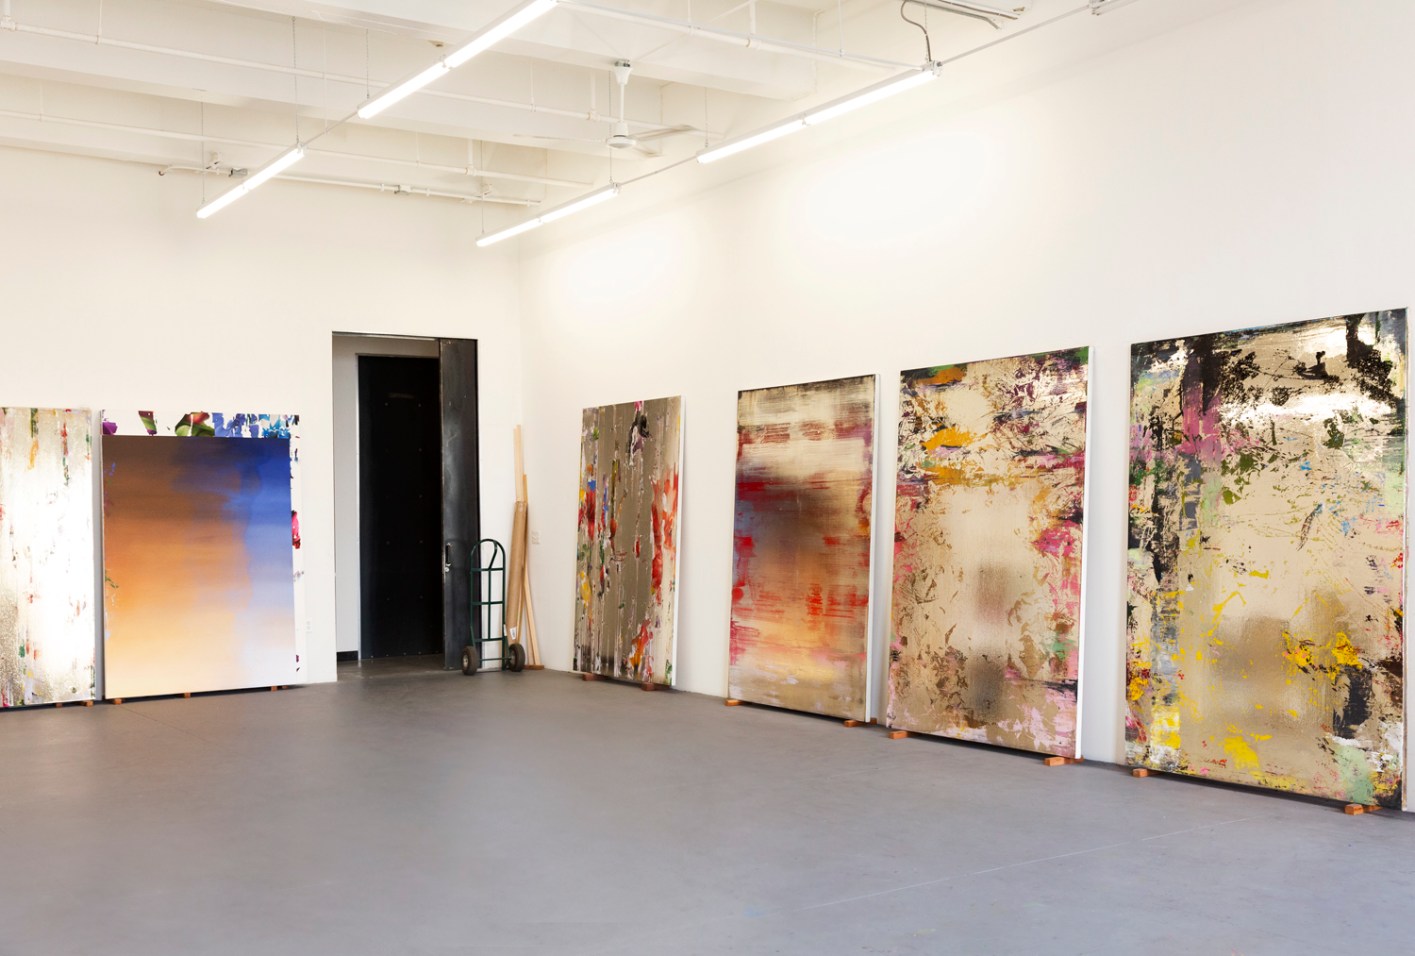 Nir Hod’s airy studio space at Mana Contemporary